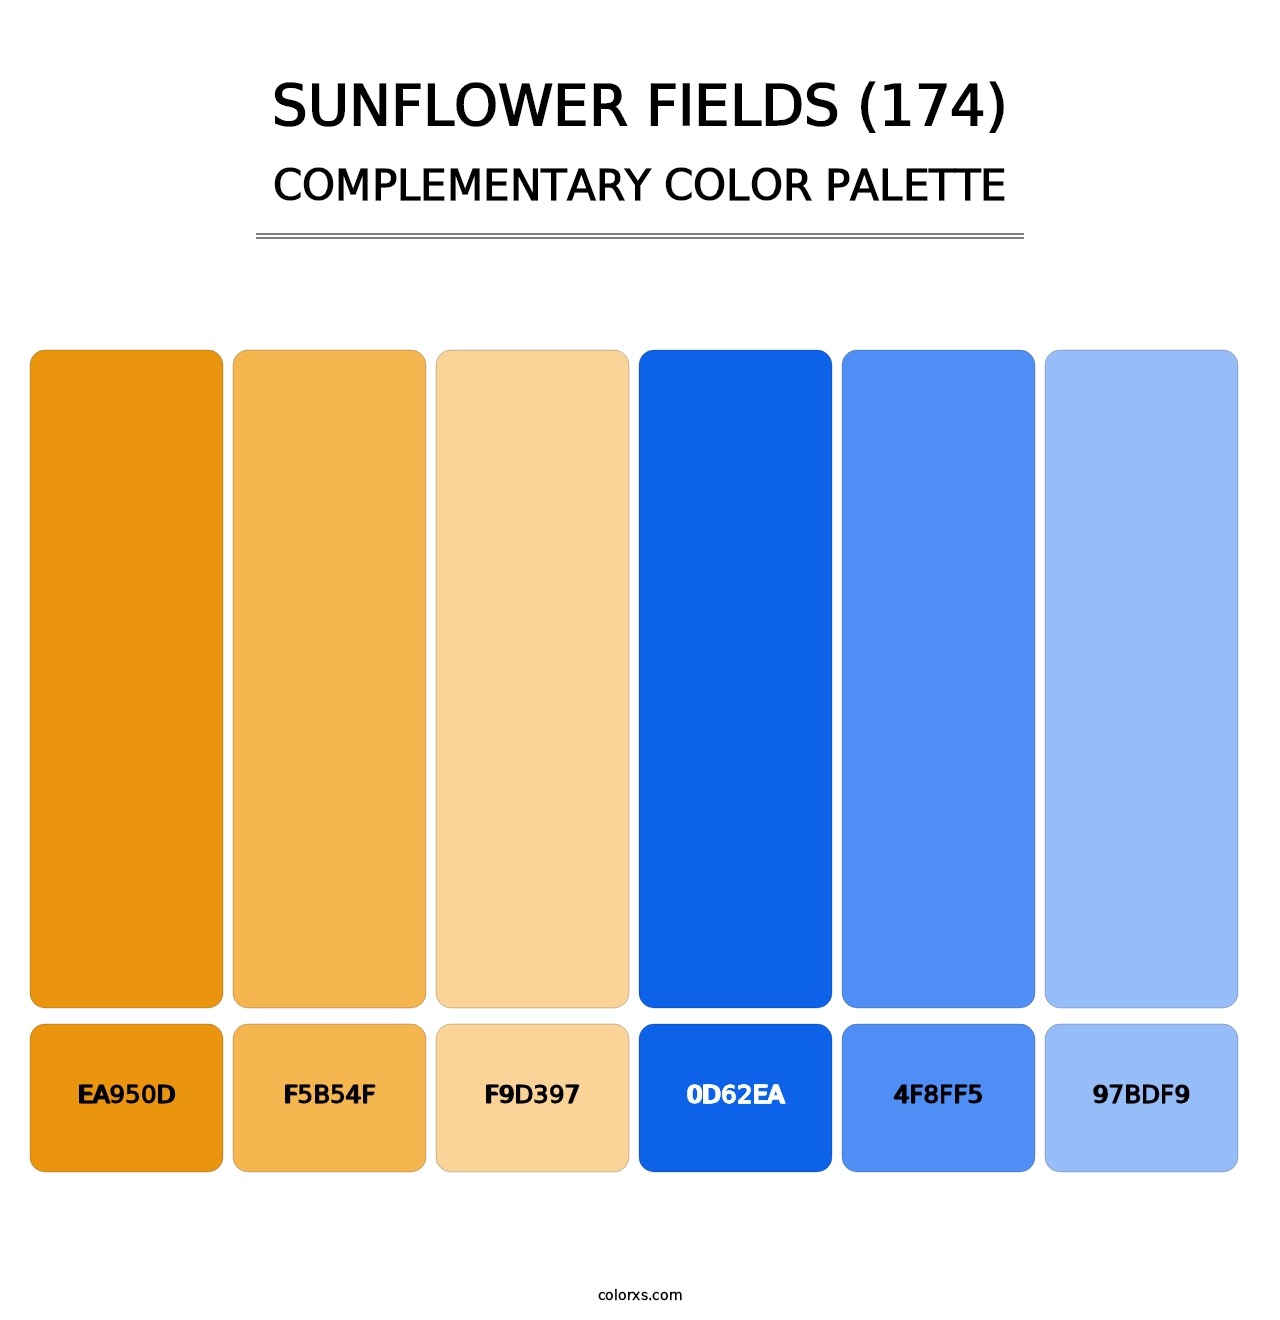 Sunflower Fields (174) - Complementary Color Palette